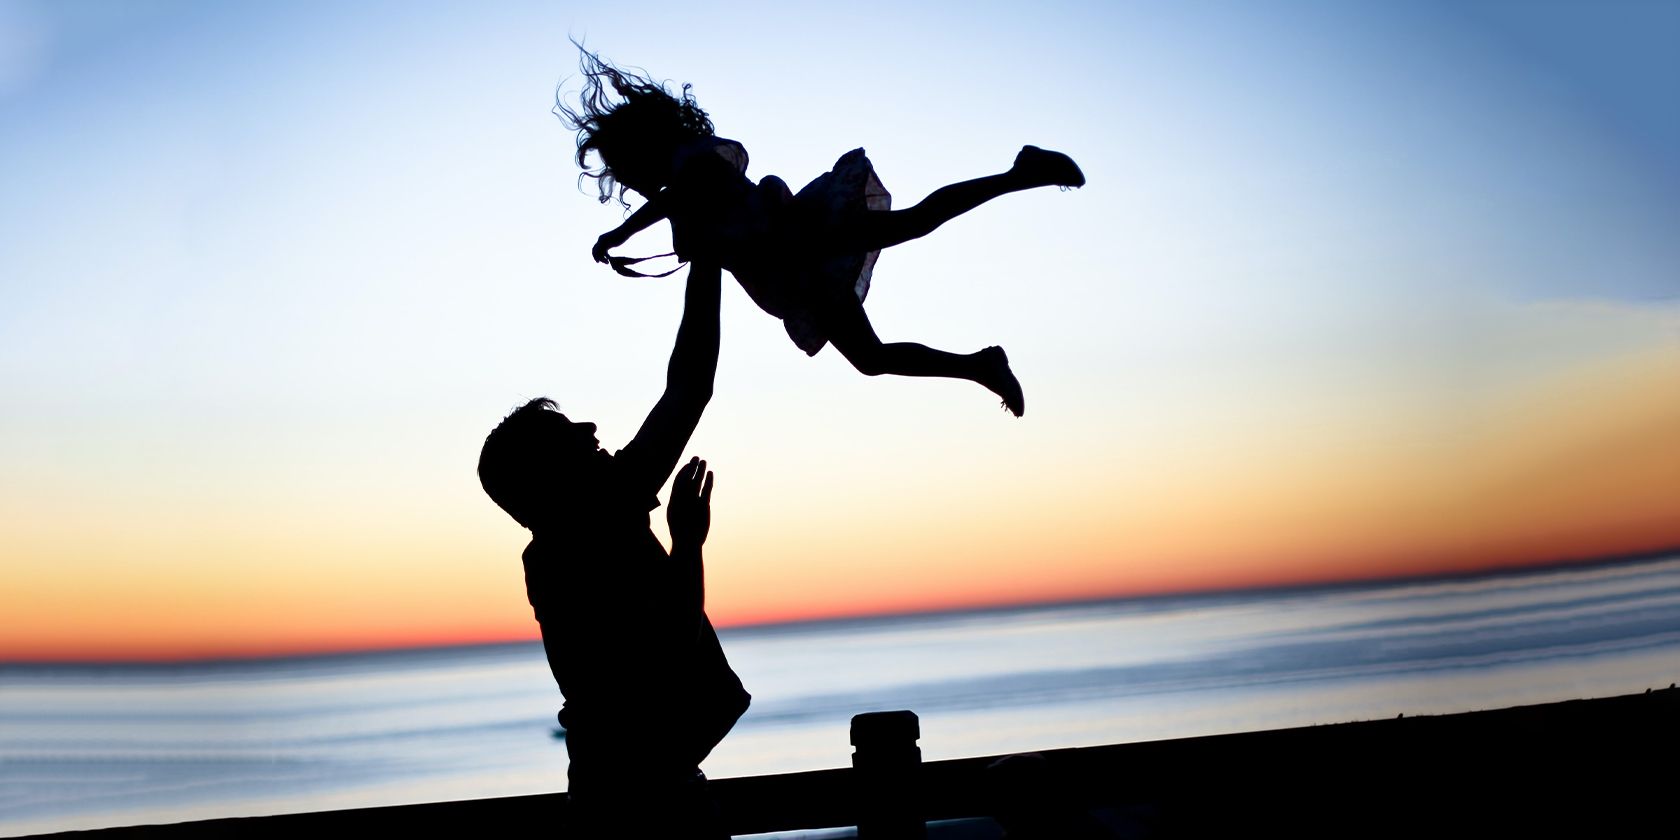 man playing with his young daughter on a beach